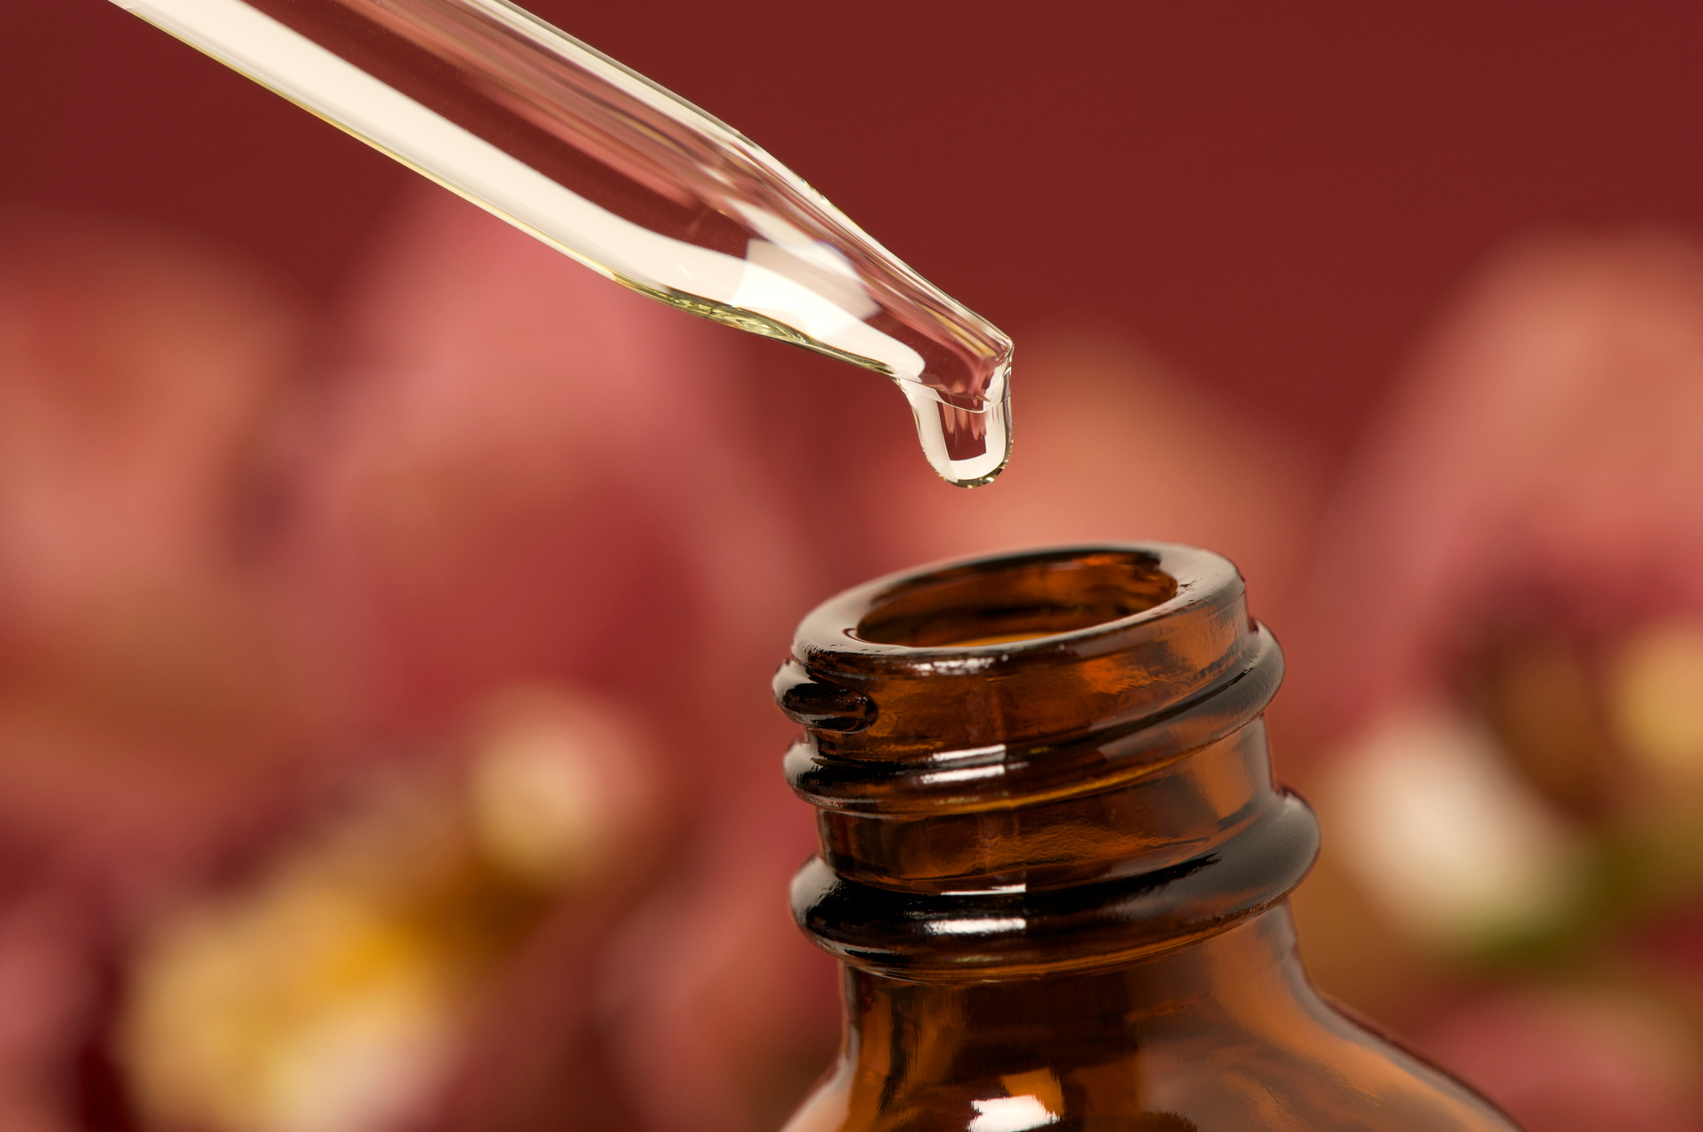 Essential oils with dropper above bottle